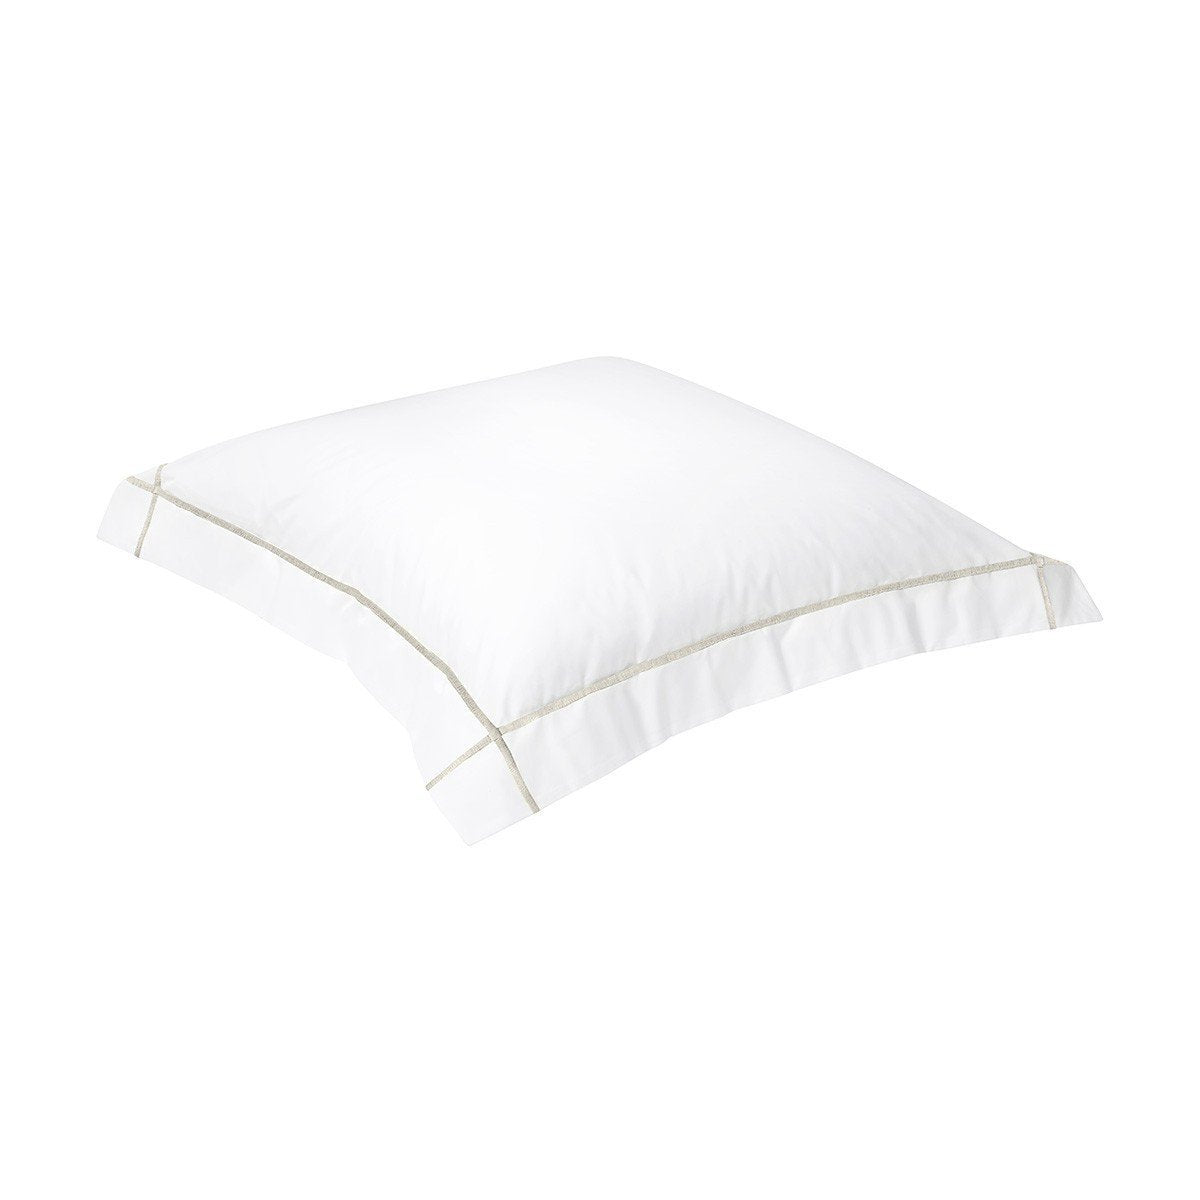 Athena Nacre Bedding Collection by Yves Delorme | Fig Linens - White and ivory euro sham